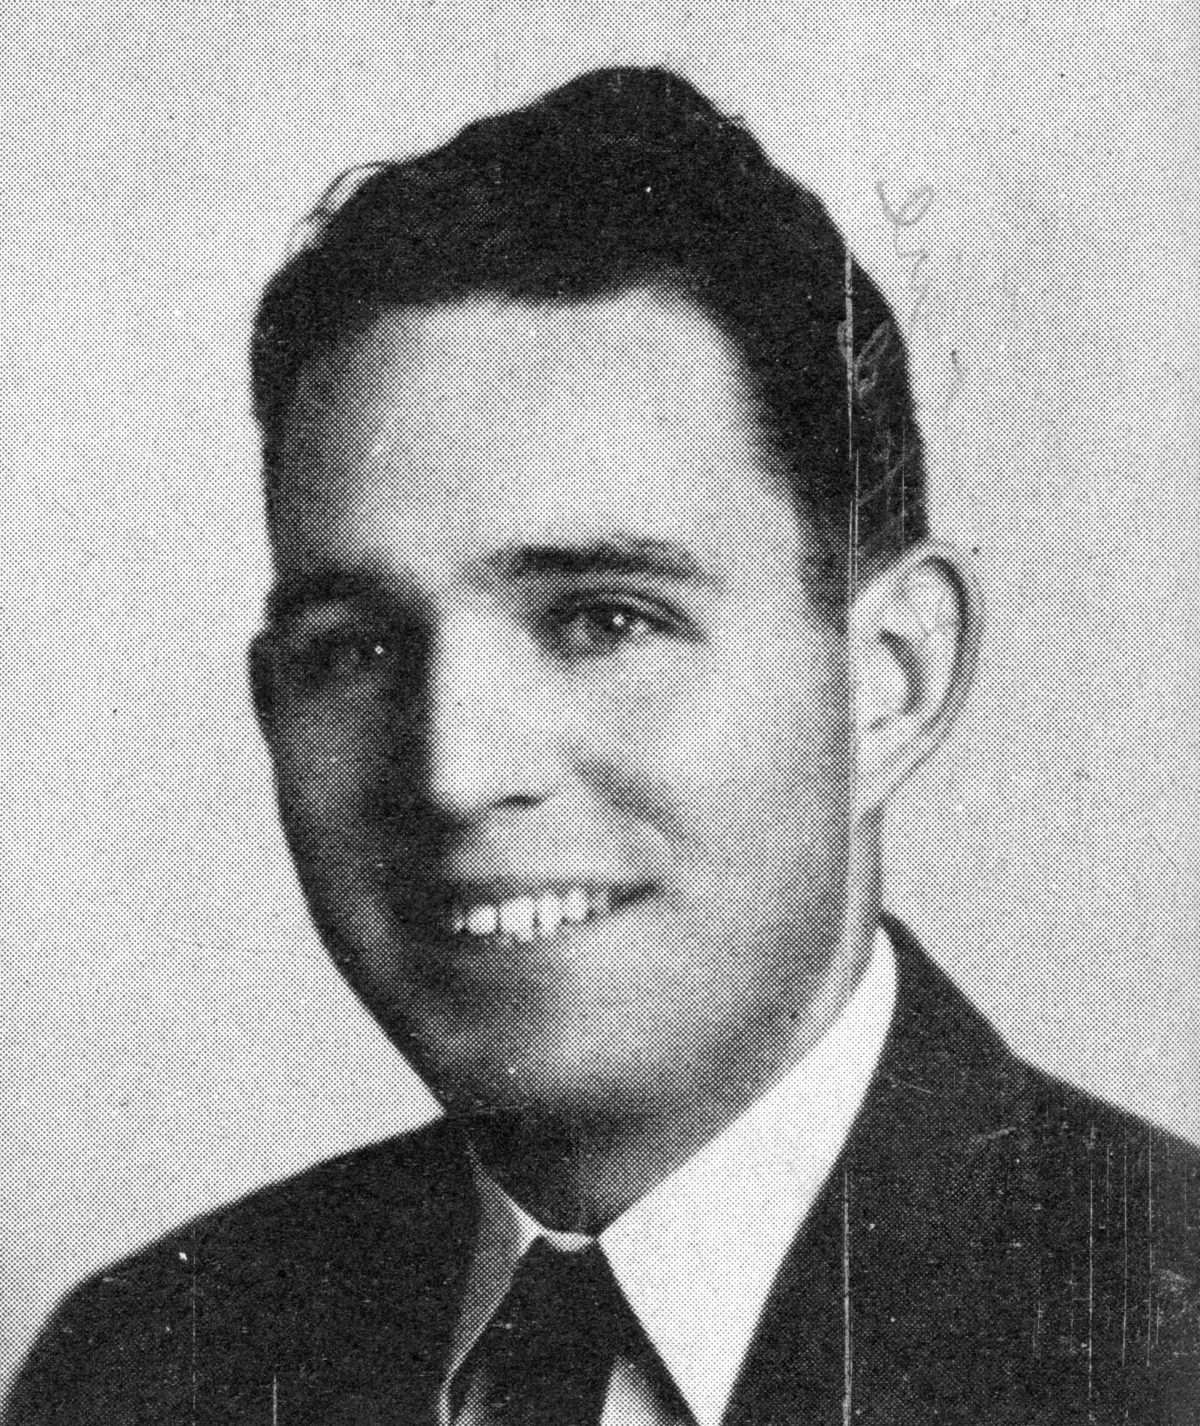 Earl Edge, black and white photo from the 1946 ACC Yearbook.